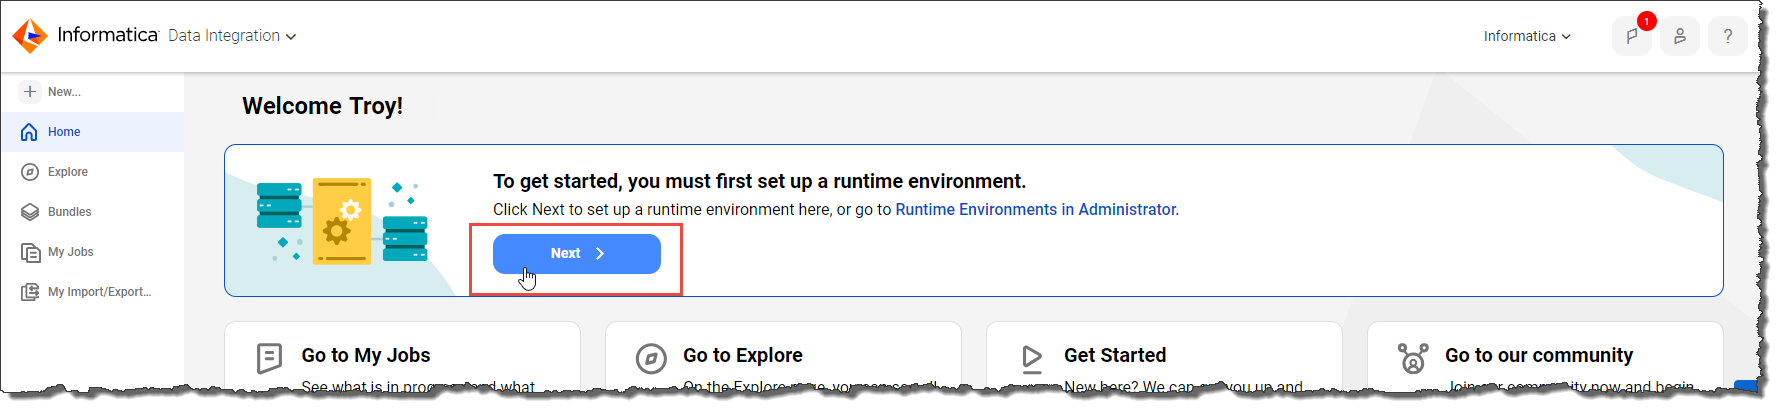 If your organization uses the unified Home page, you can install a Secure Agent in a cloud environment by clicking Next in the "To get started, you must first set up a runtime environment" panel. This panel appears at the top of the page when your organization has no runtime environments. 
		  